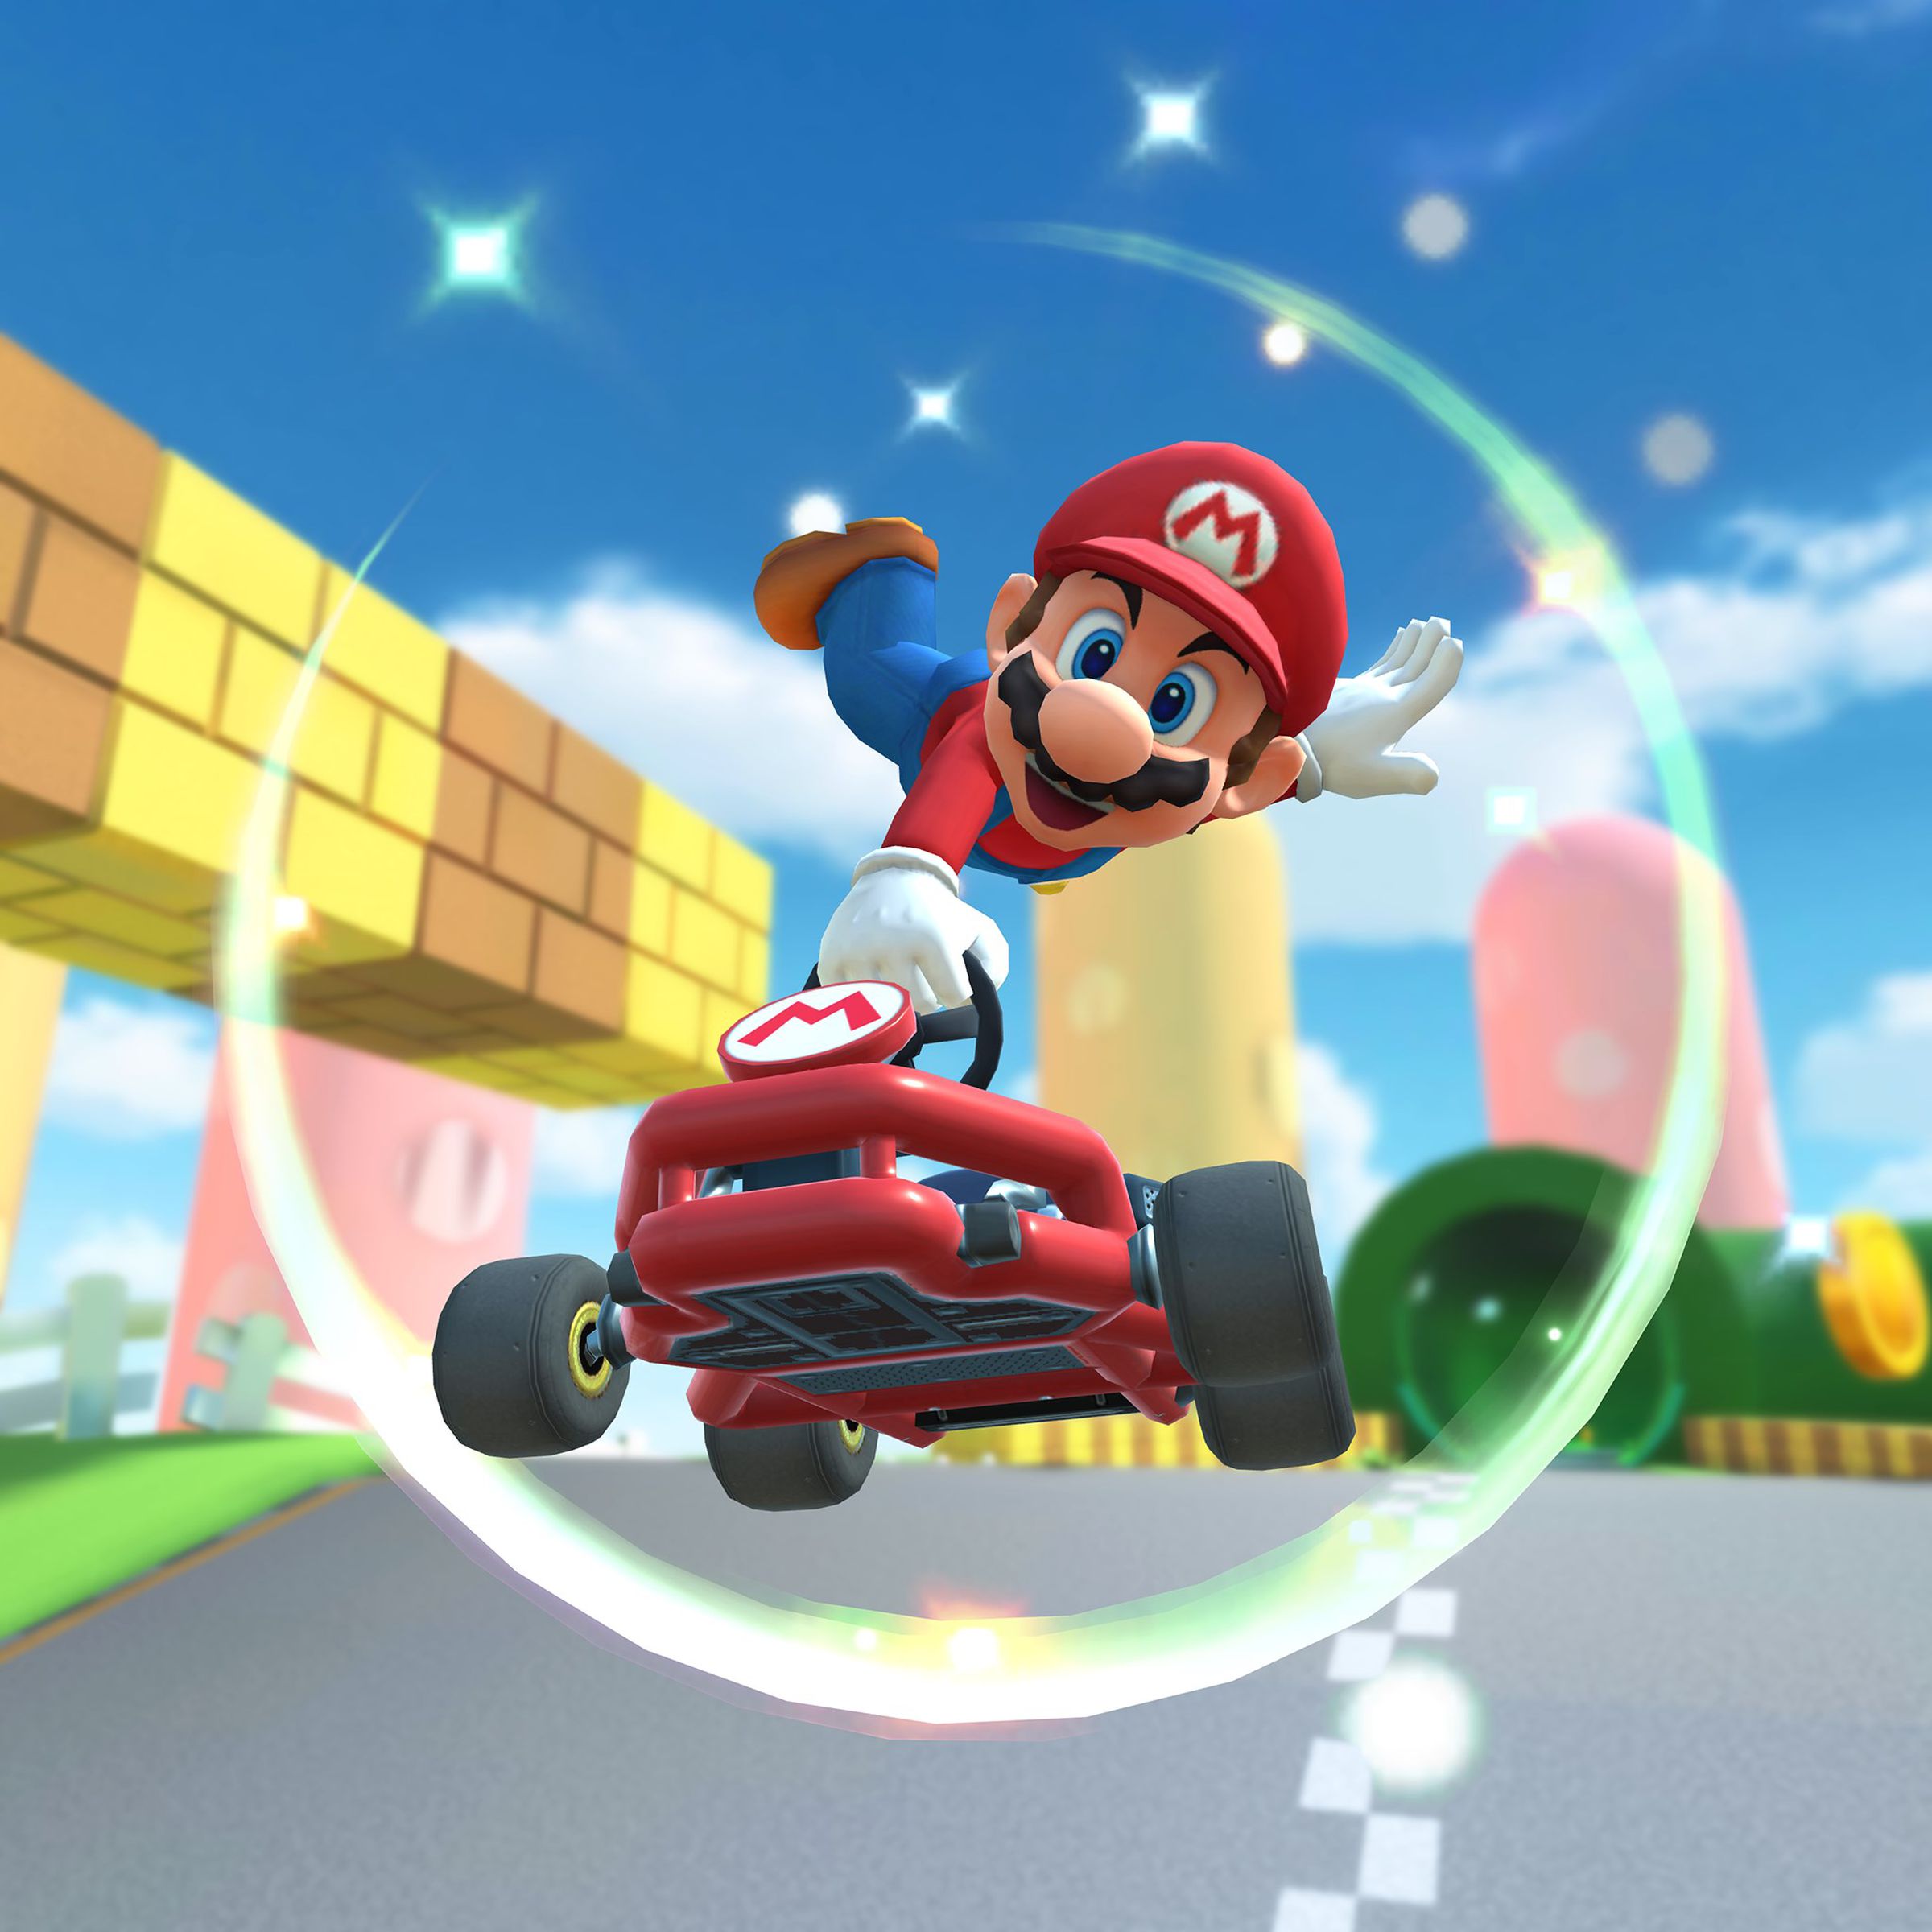 Mario in a car while racing in the game Mario Kart Tour.